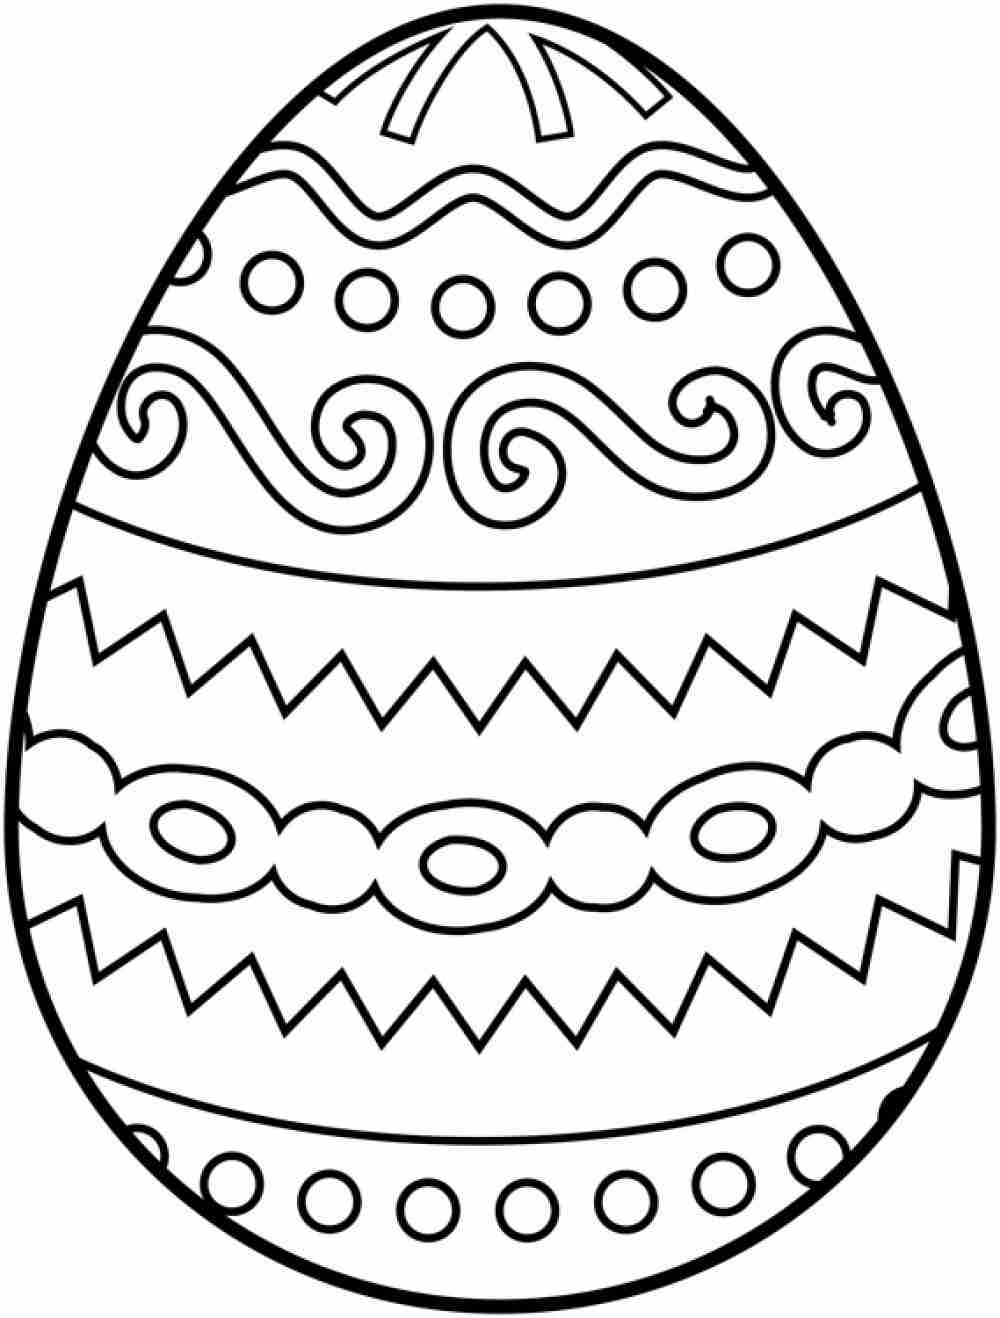 Coloring Pages For Adults Easter Coloring Book Easter Coloring Pages Adults At Getdrawings Com Free